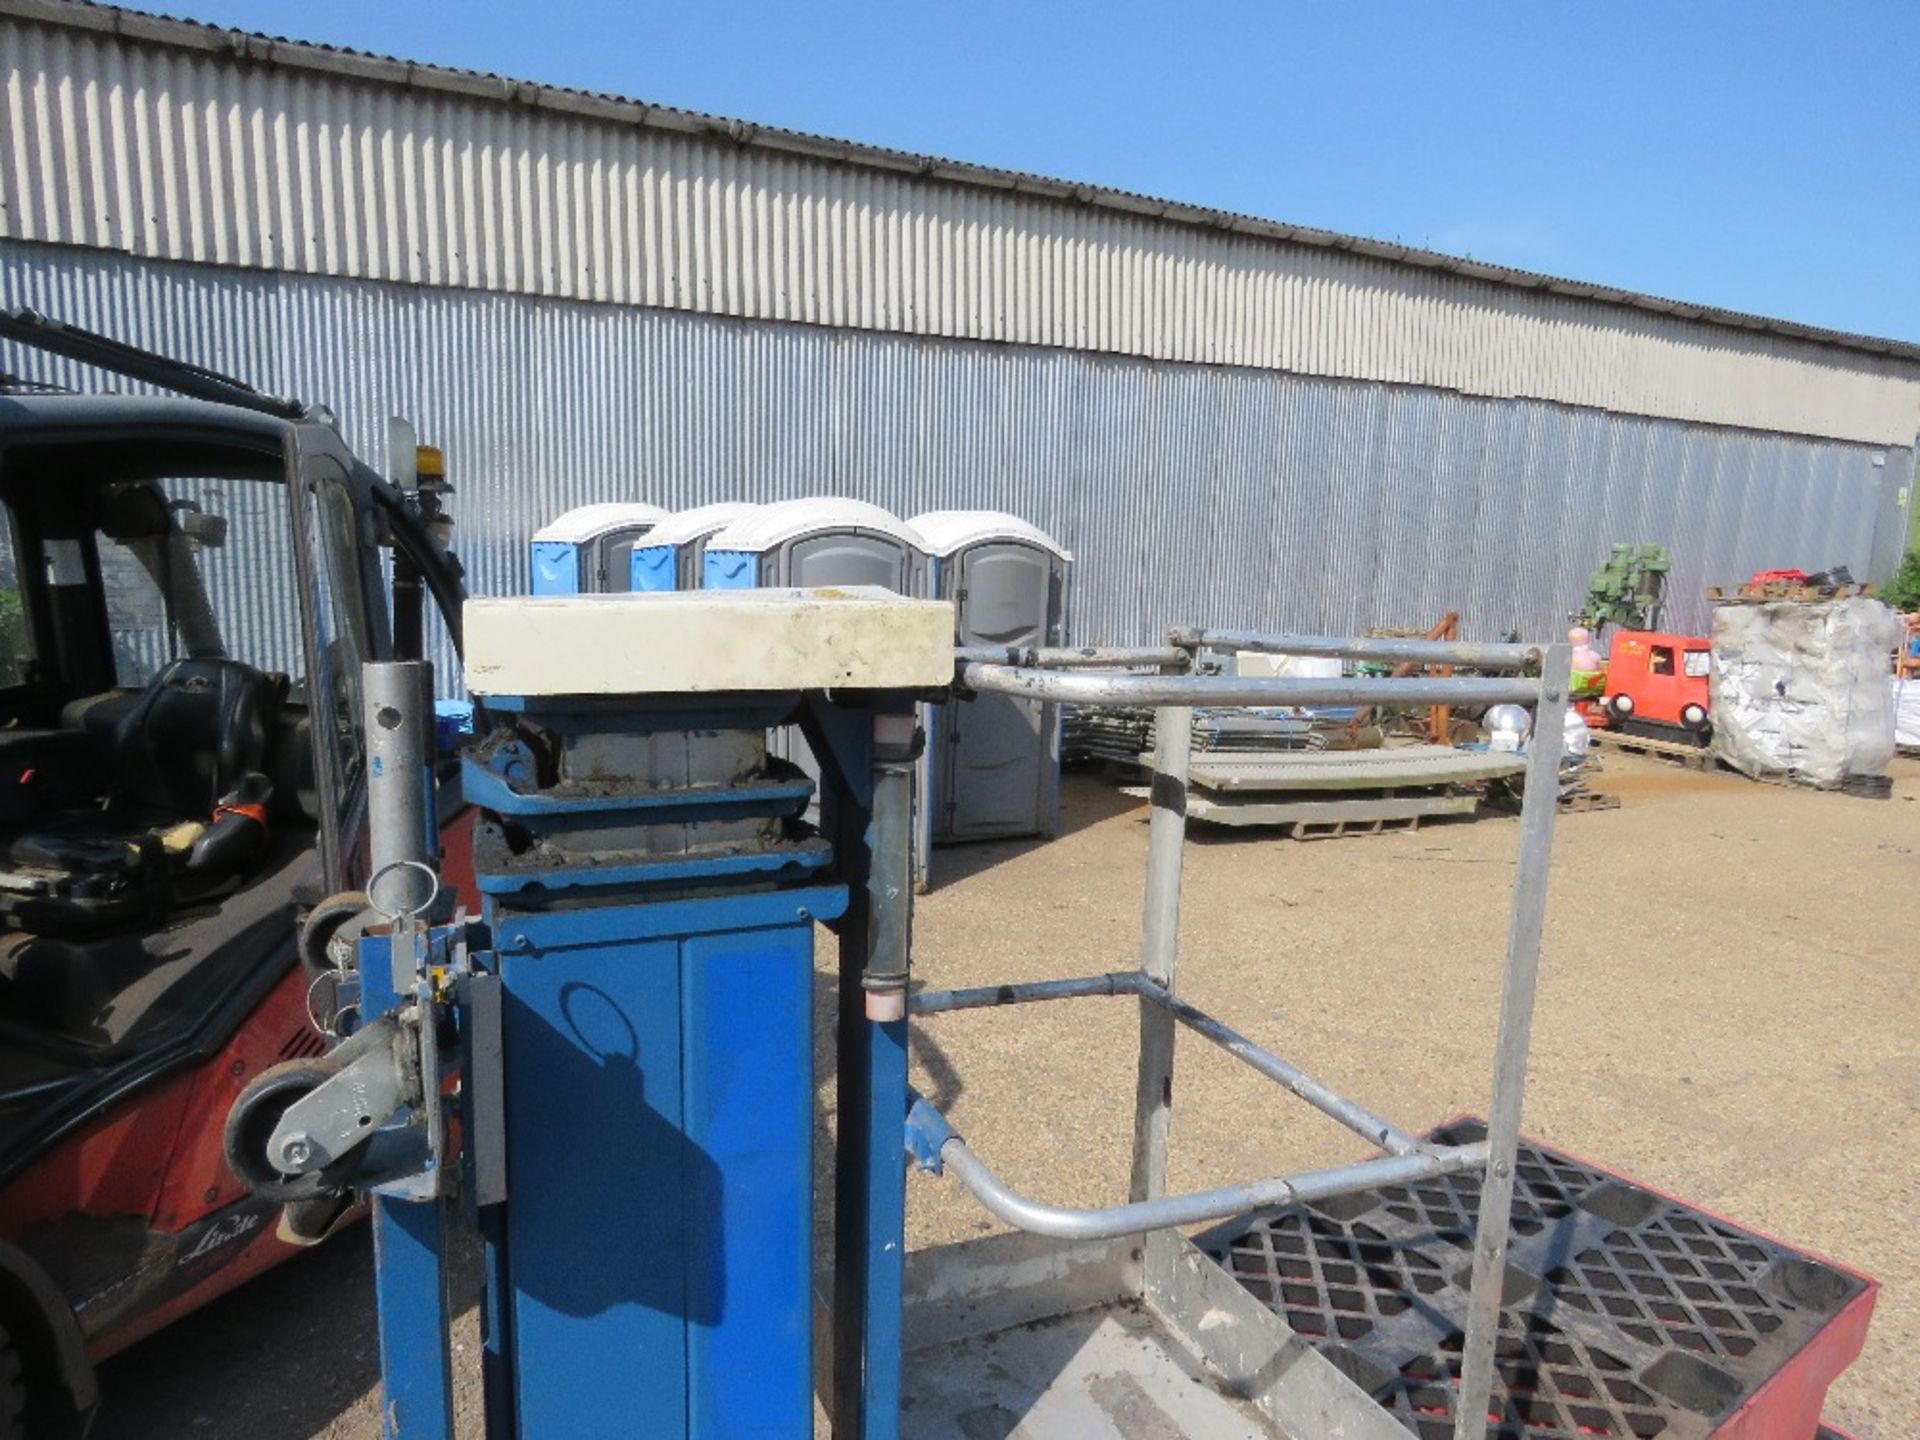 UPRIGHT UL20 MAST LIFT UNIT, 20 FOOT WORK HEIGHT. THIS LOT IS SOLD UNDER THE AUCTIONEERS MARGIN S - Image 4 of 4